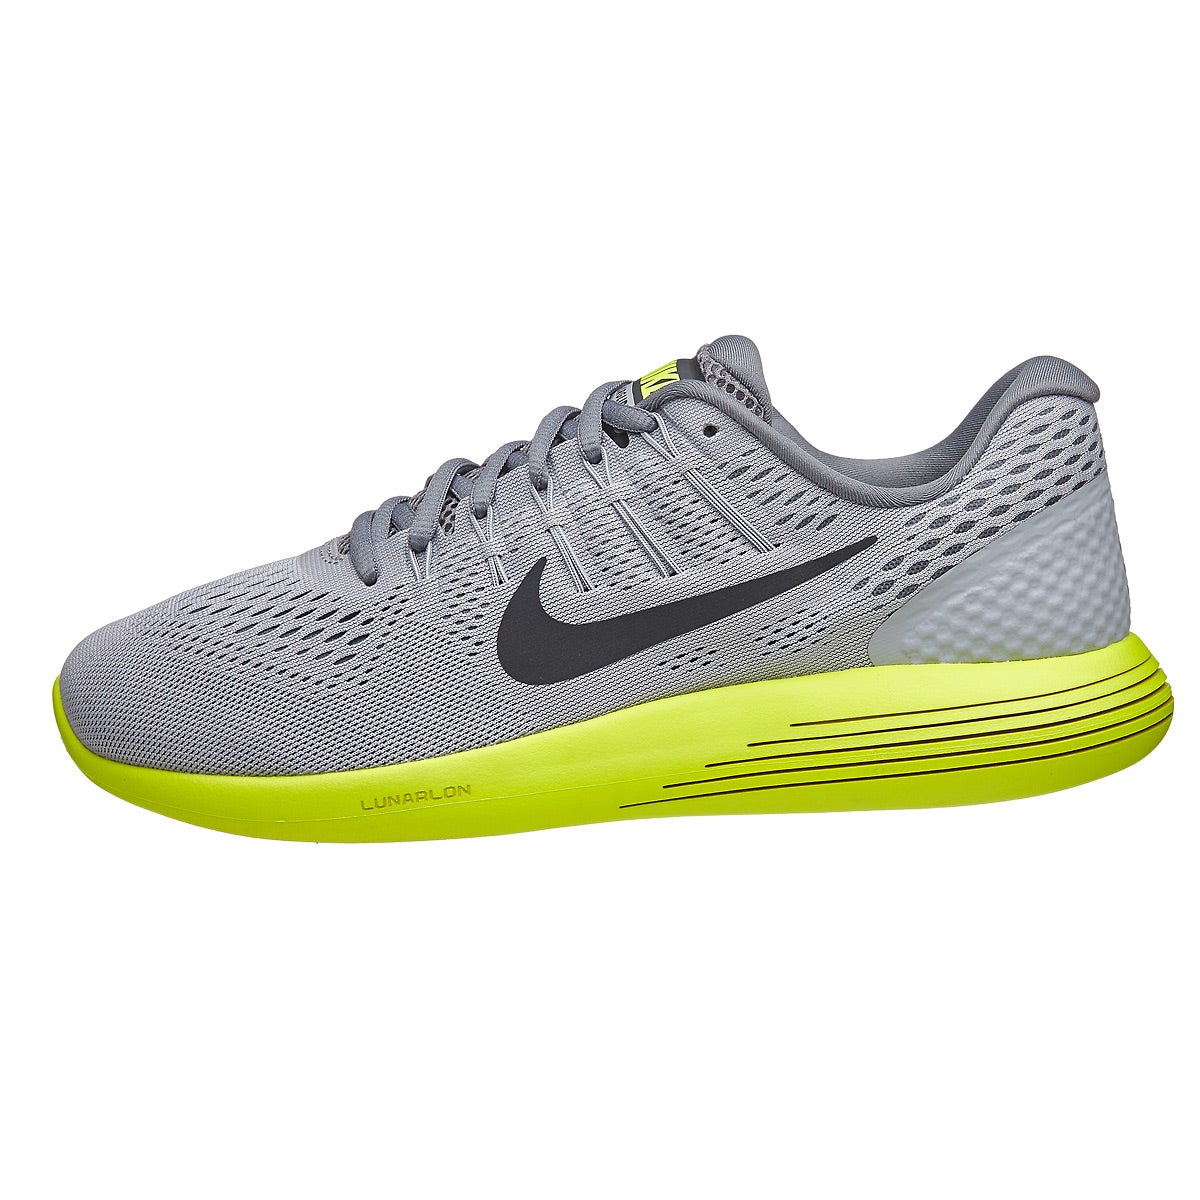 Nike LunarGlide 8 Men's Shoes Wolf Grey/Anthracite/V 360° View ...